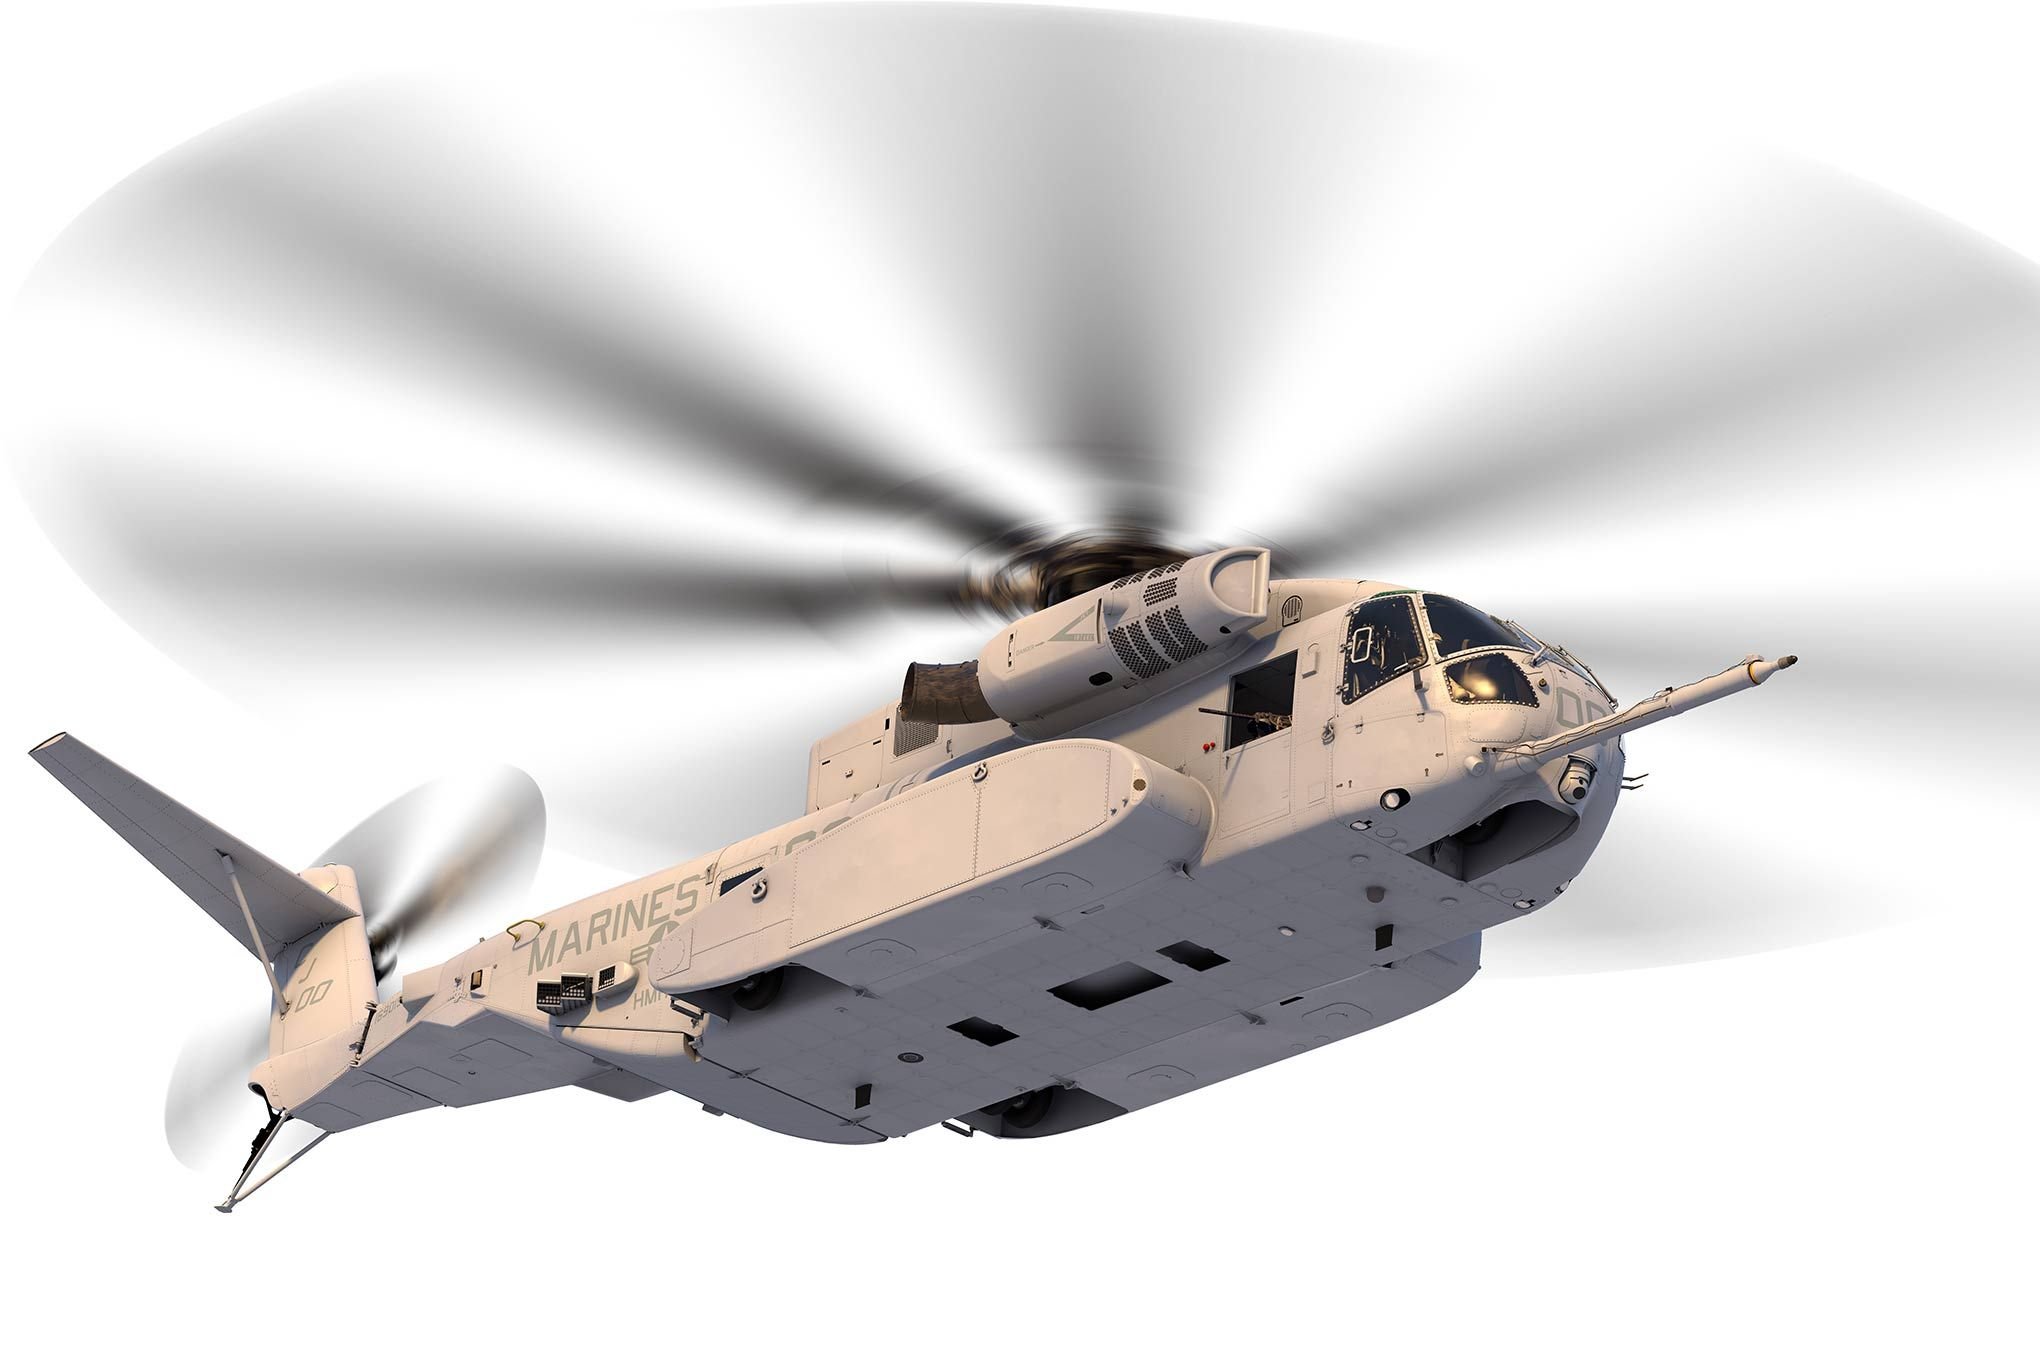 sikorsky, Ch 53k, Helicopter, Military Wallpaper